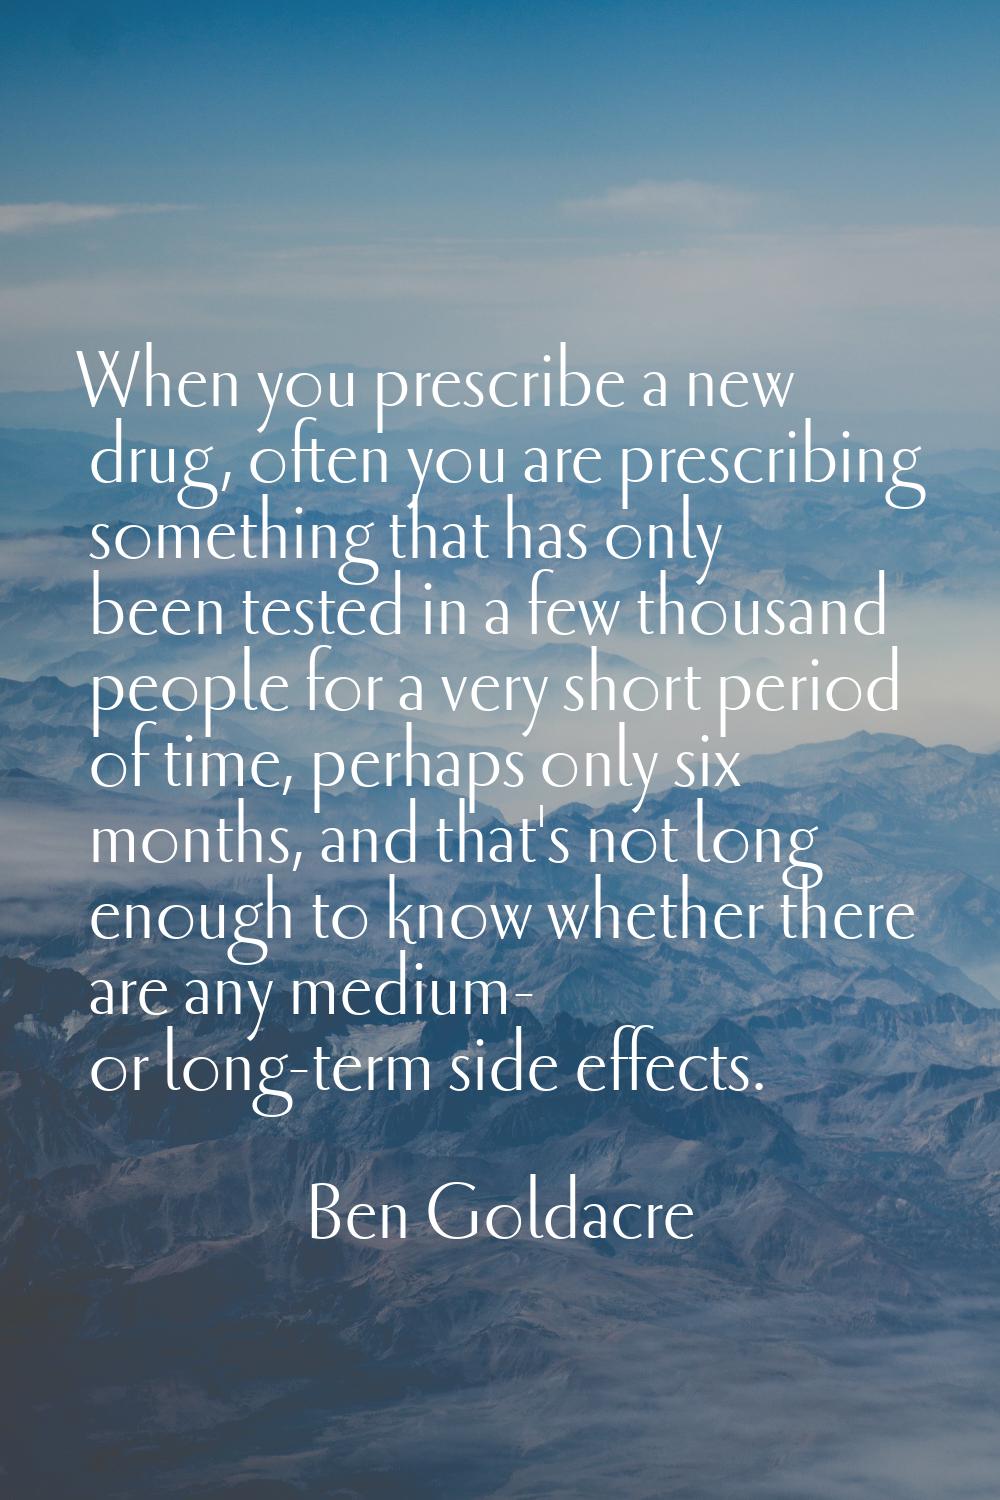 When you prescribe a new drug, often you are prescribing something that has only been tested in a f